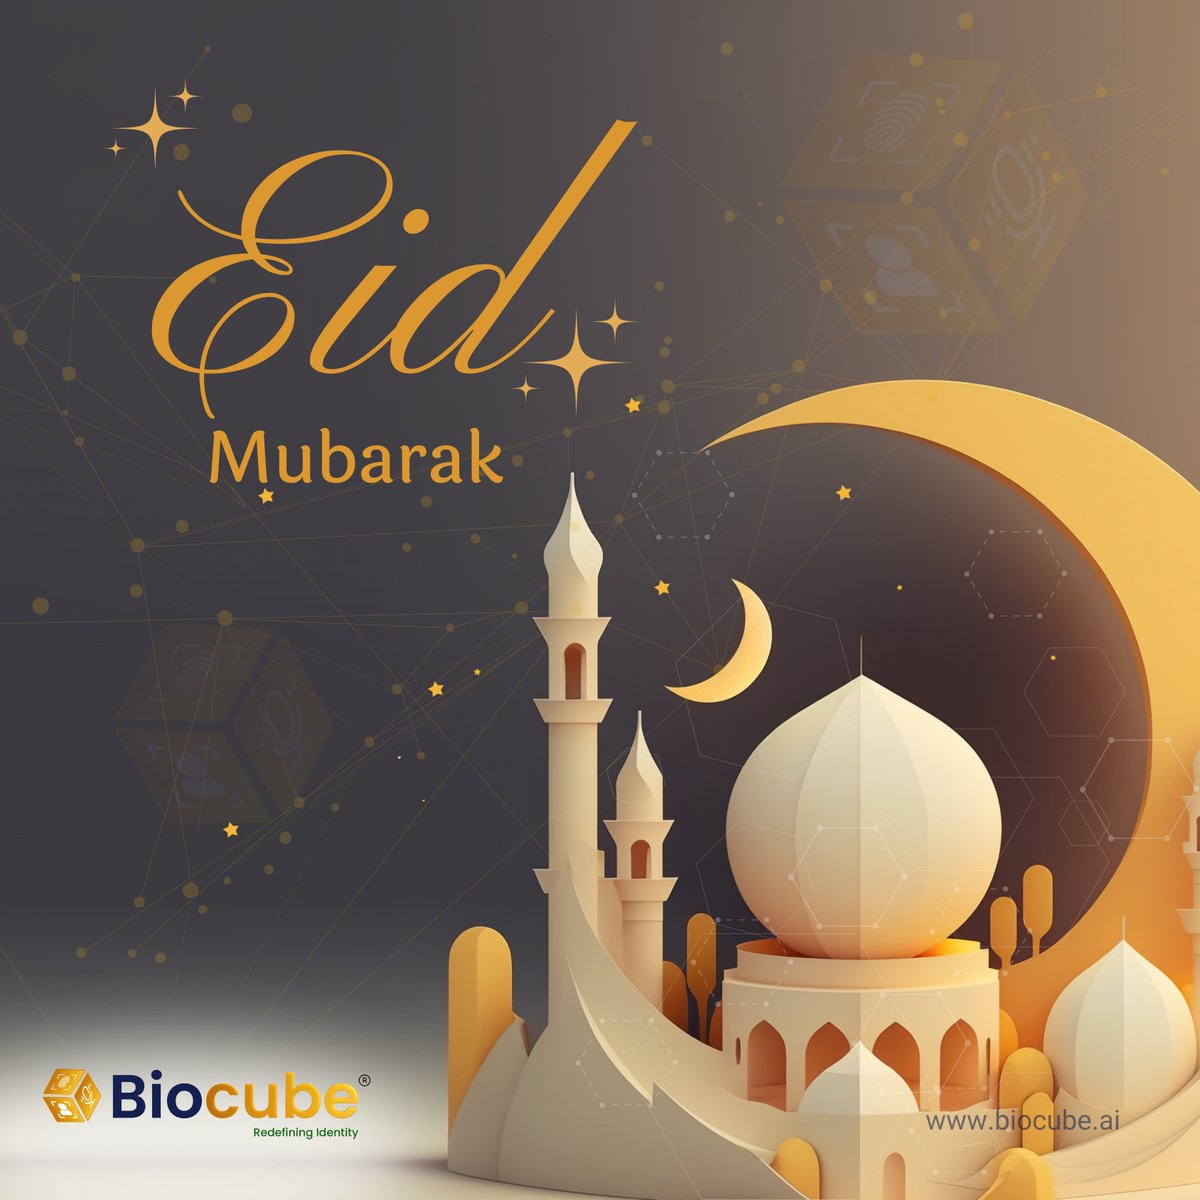 May this #Eid bring joy, prosperity & countless blessings to you and your family! As we safeguard #digitalidentities & #livedataanalytics to empower #businesses, may this #festiveseason bring clarity & insight into your #lives. #EidMubarak from all of us at @Biocube_AI

#Eid2024